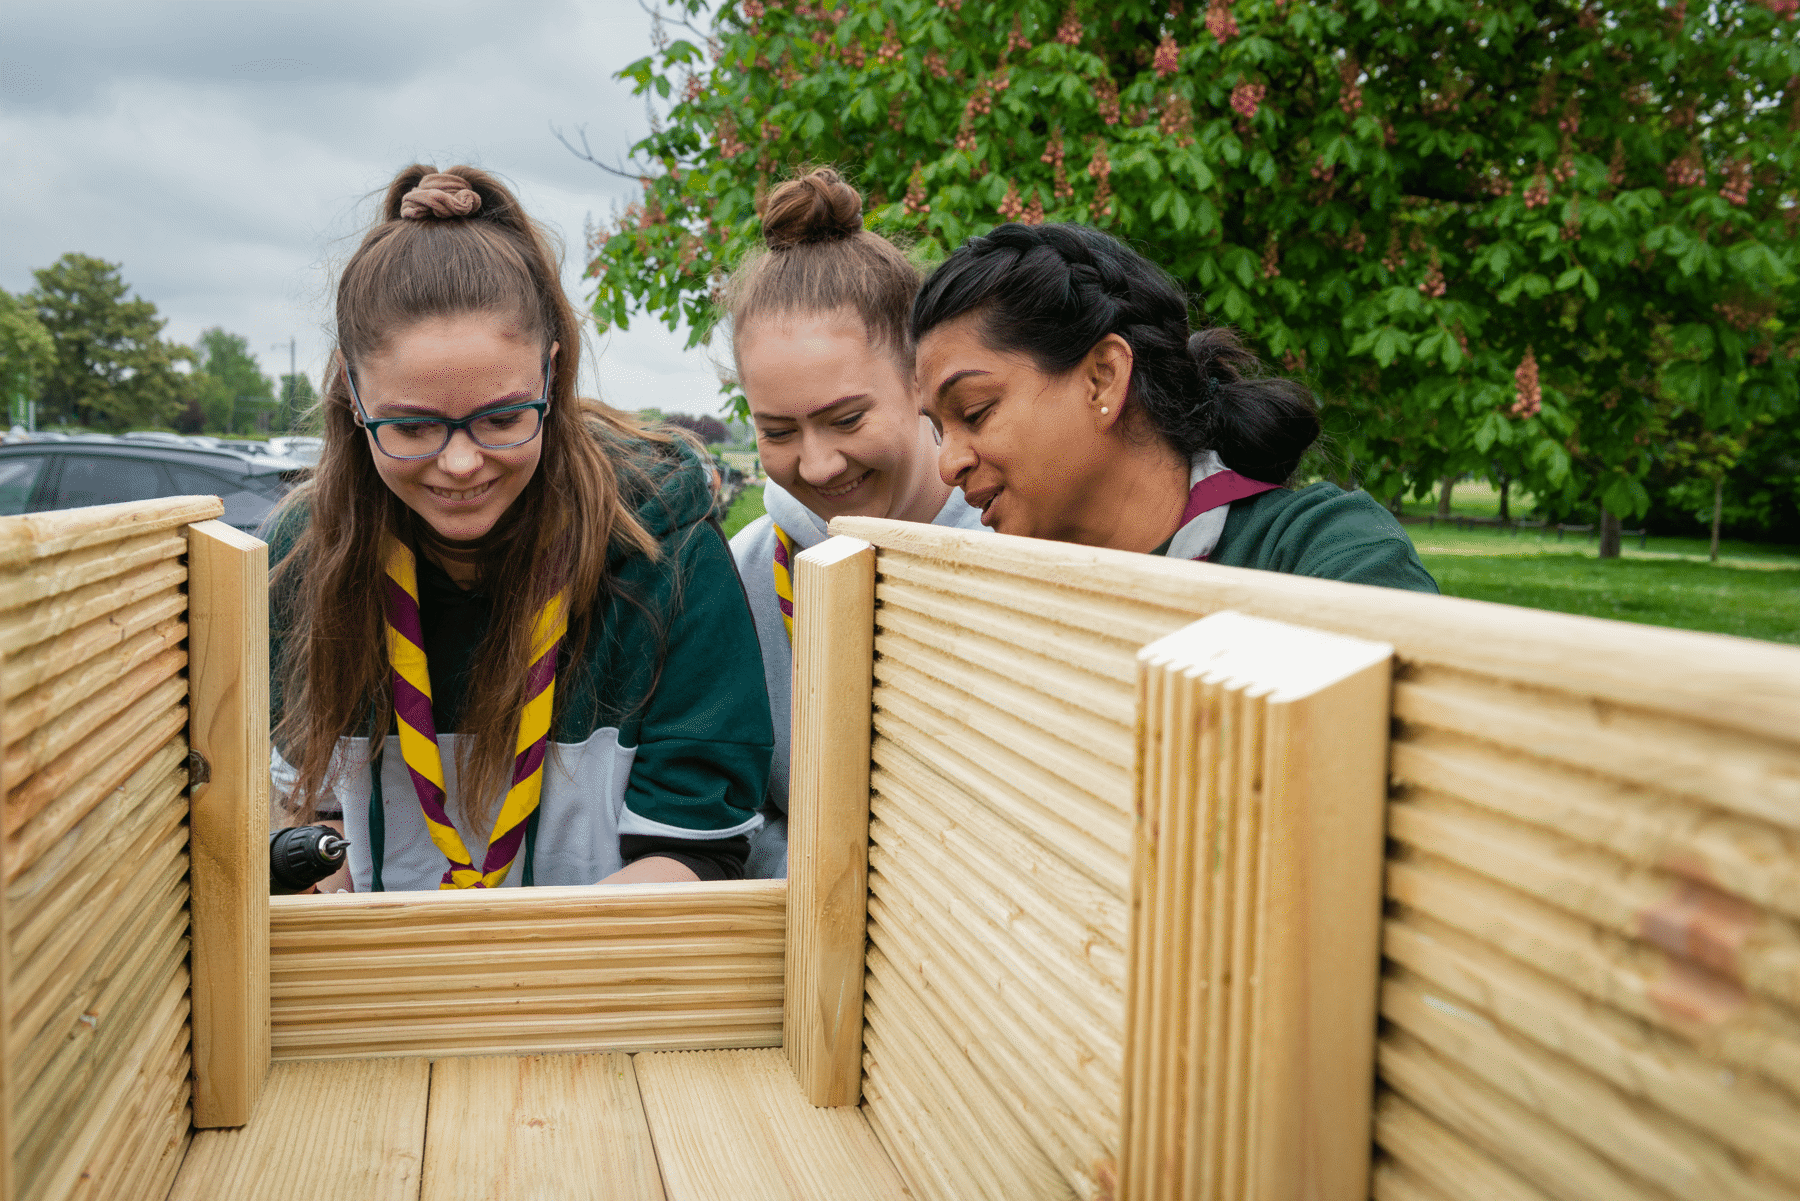 Three young volunteers building a planter together outside